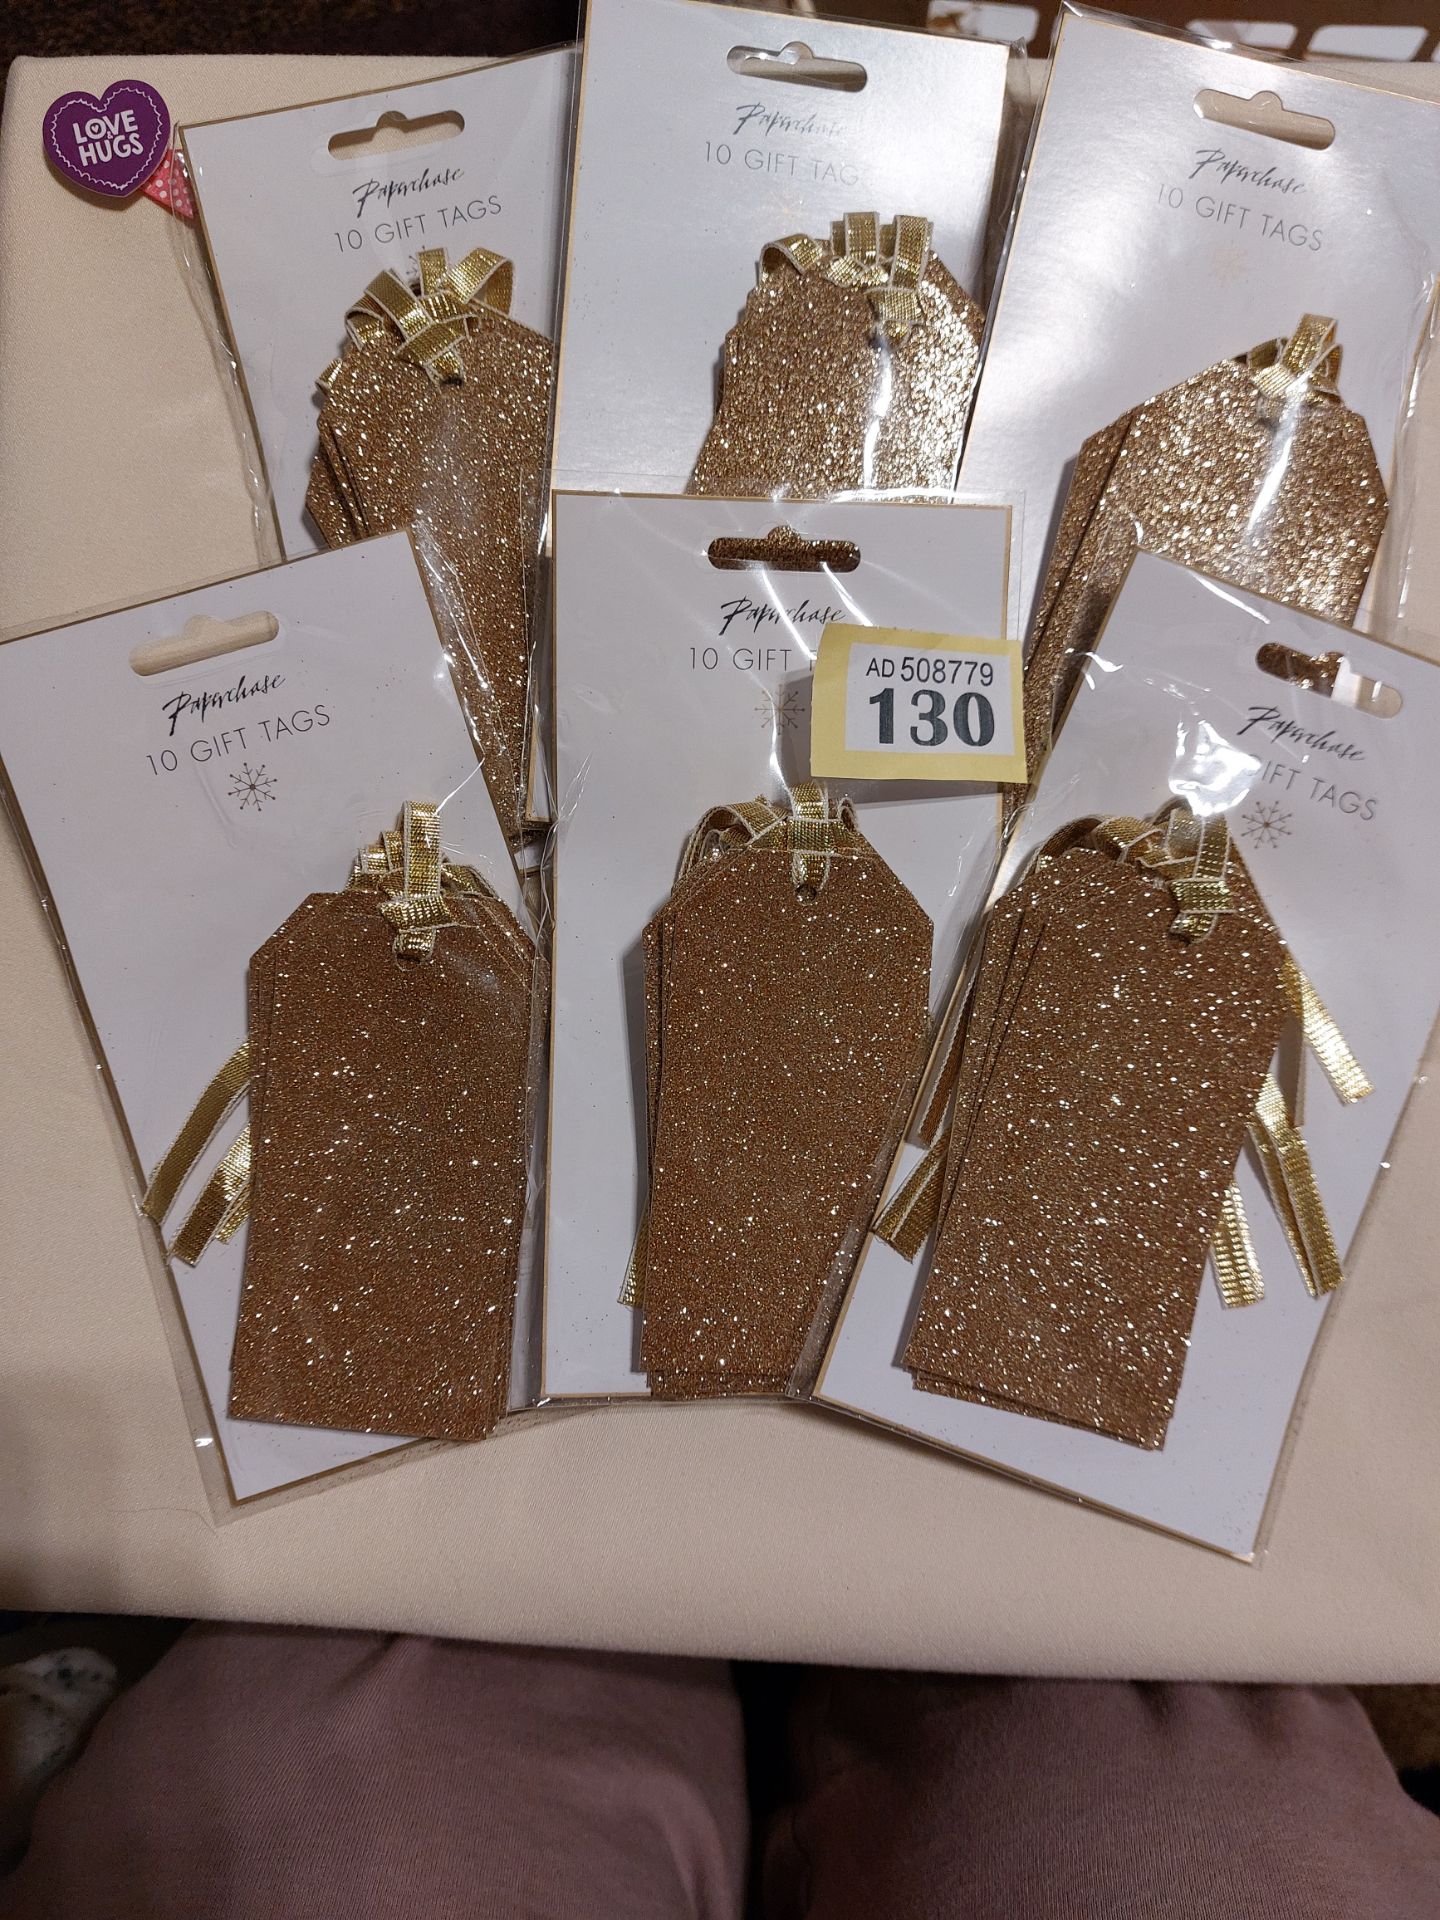 Gold Glittery Tags/Labels. Packs of 10. Box of 120 Packs Total RRP £180 - Bild 2 aus 2